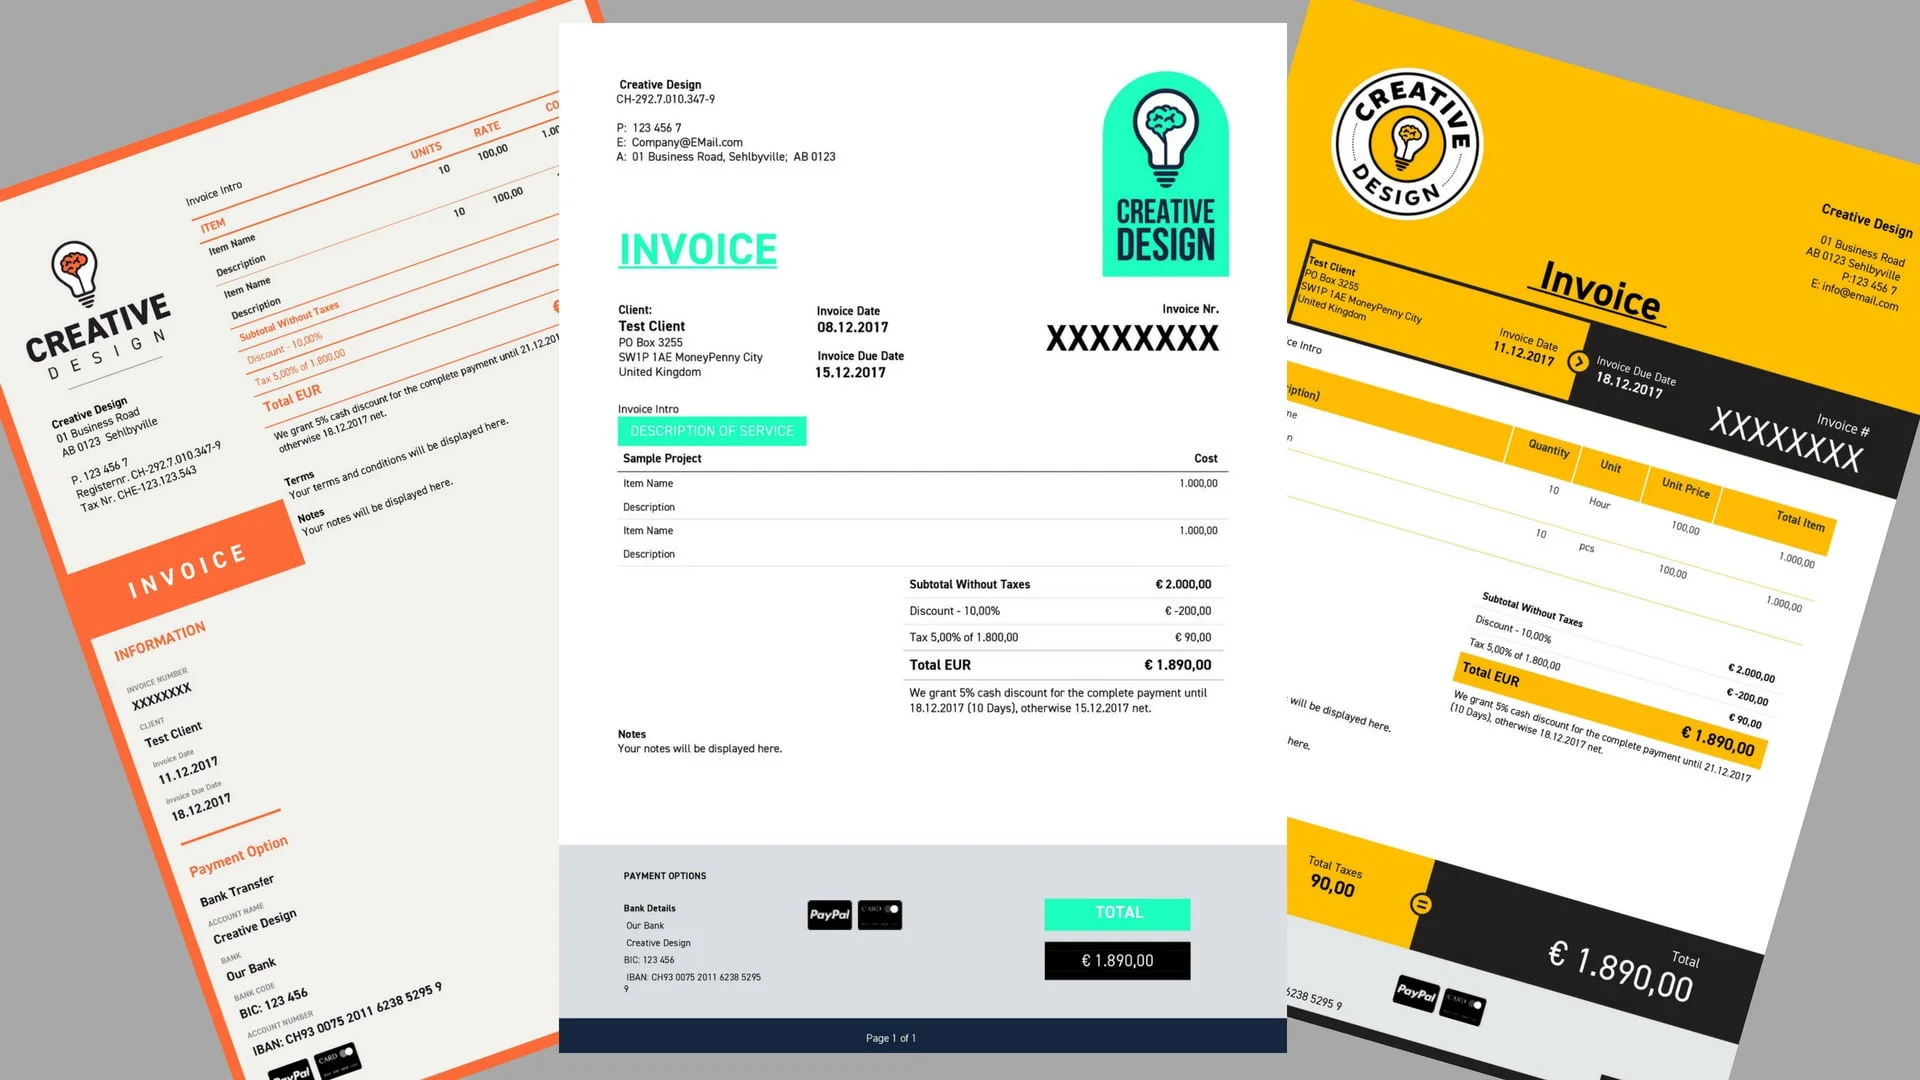 Example of invoices